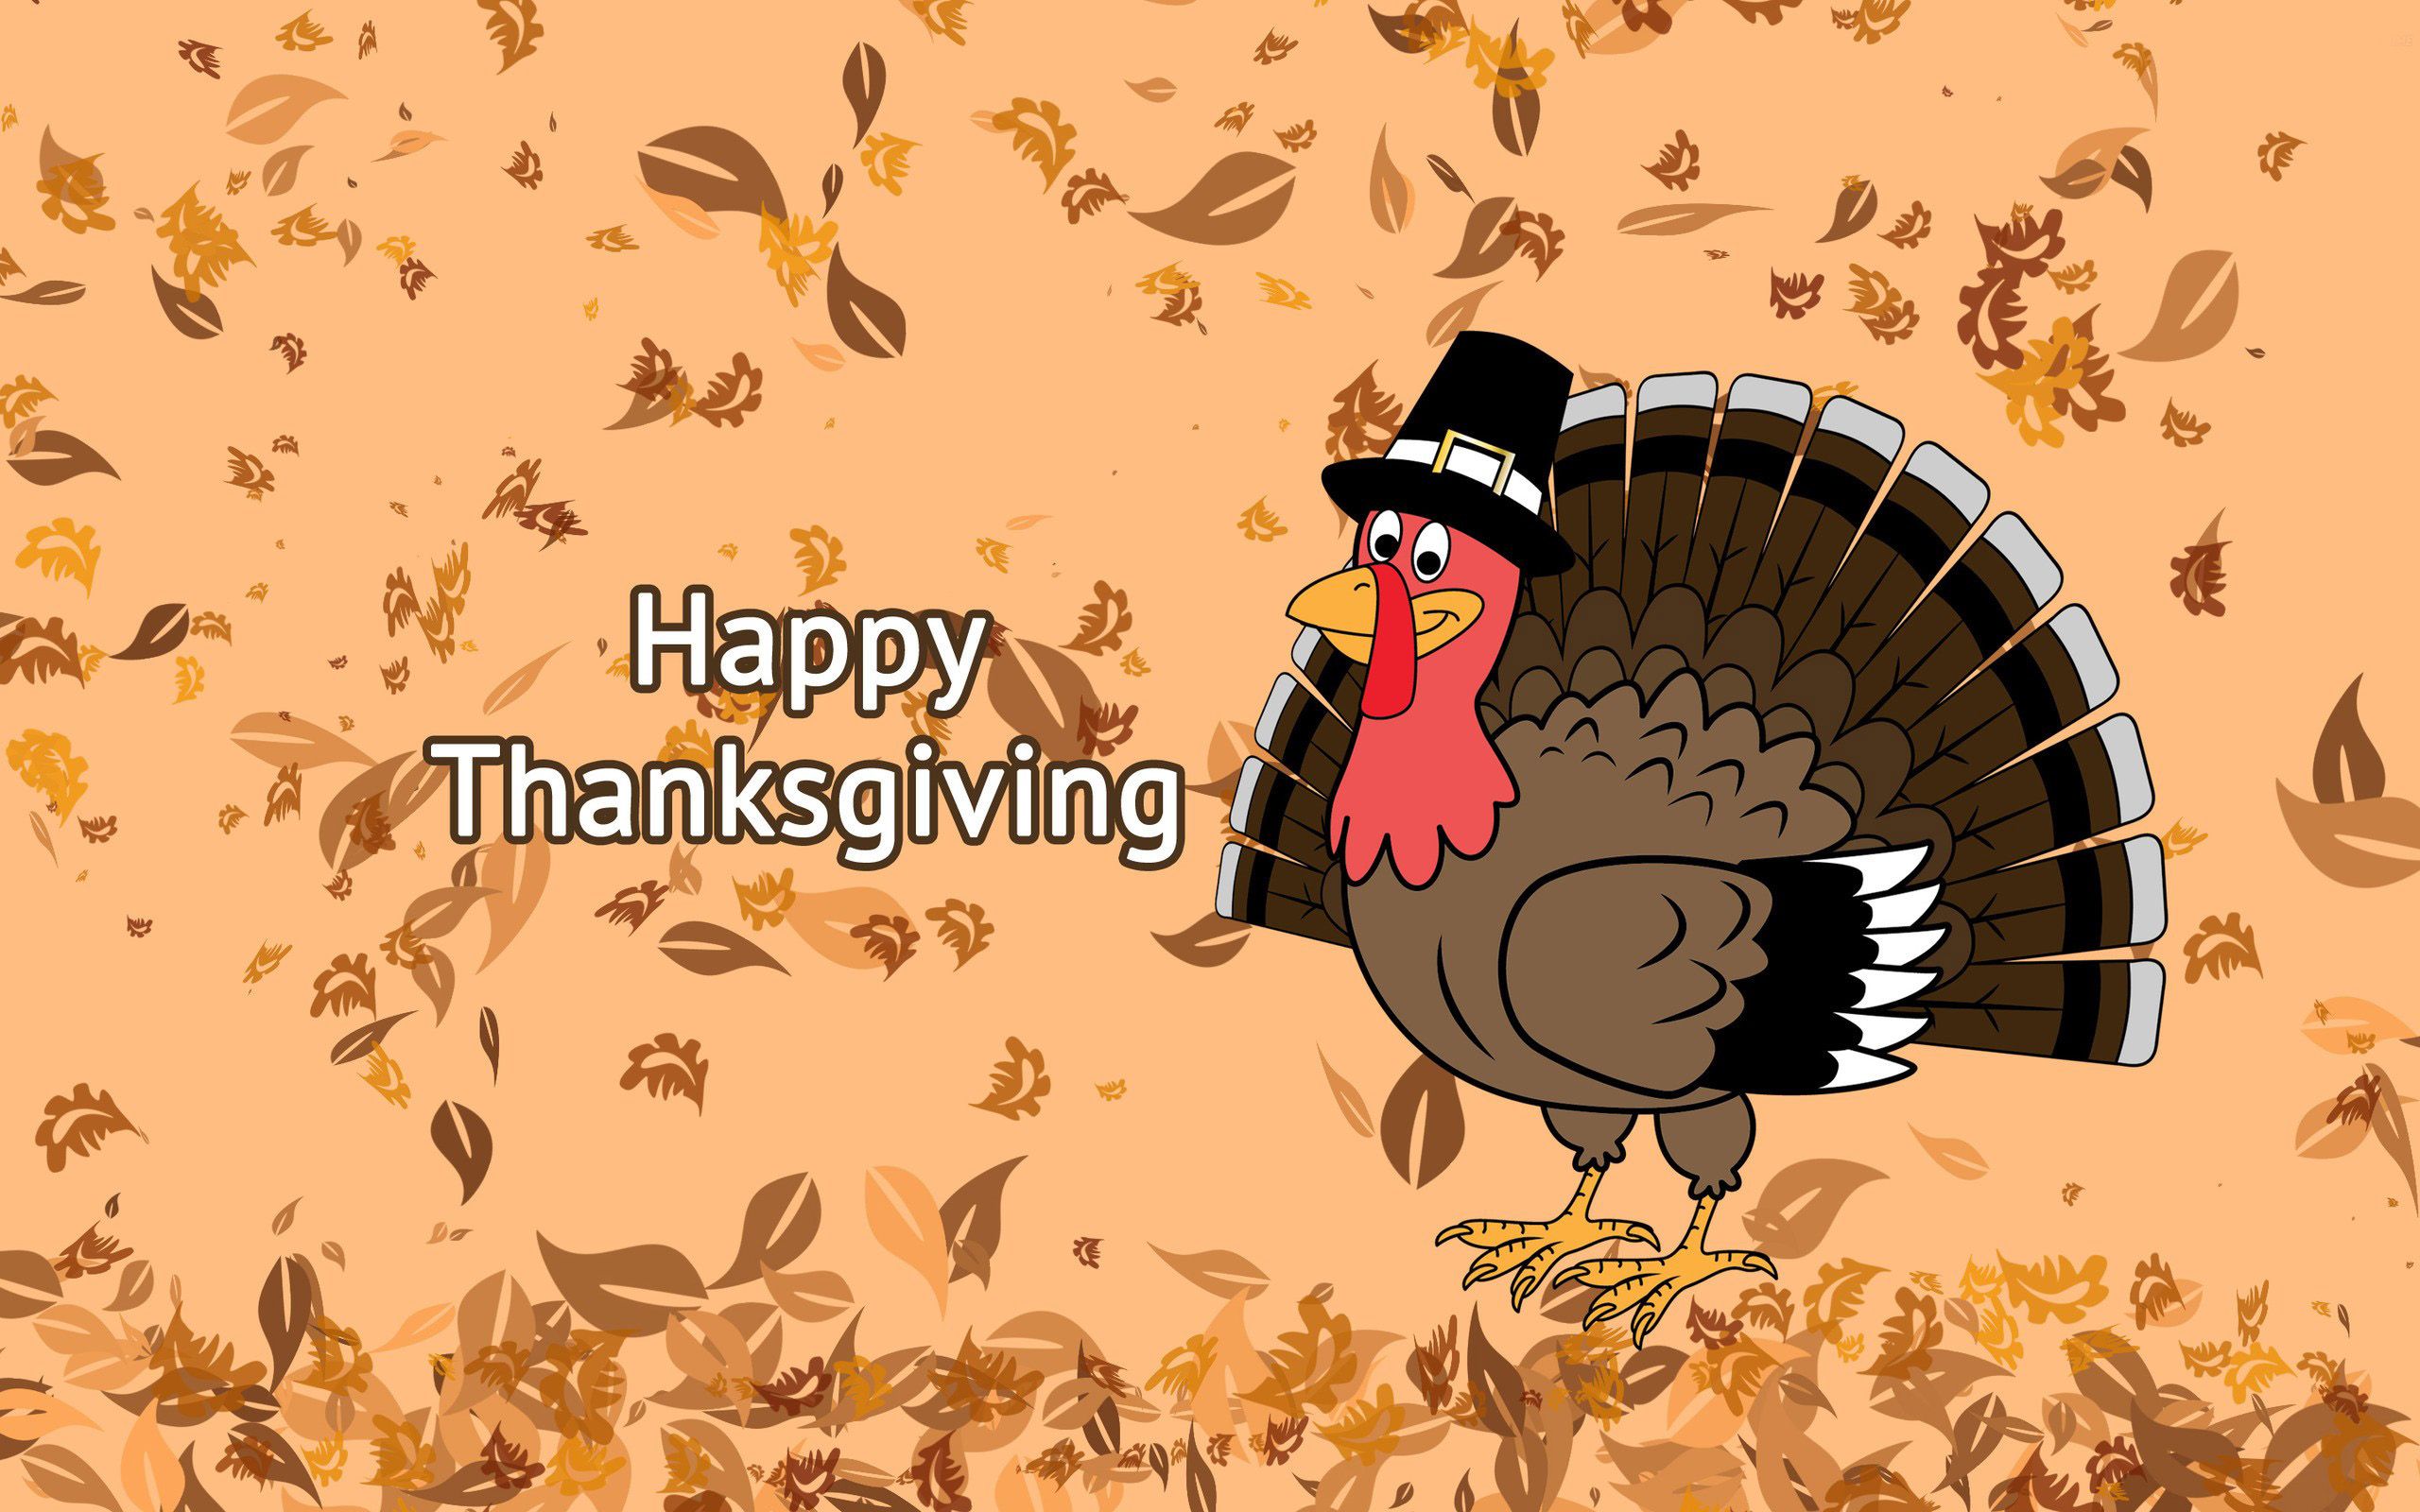 Download the Best Thanksgiving Wallpaper 2015 for Mobile, Mac and PC